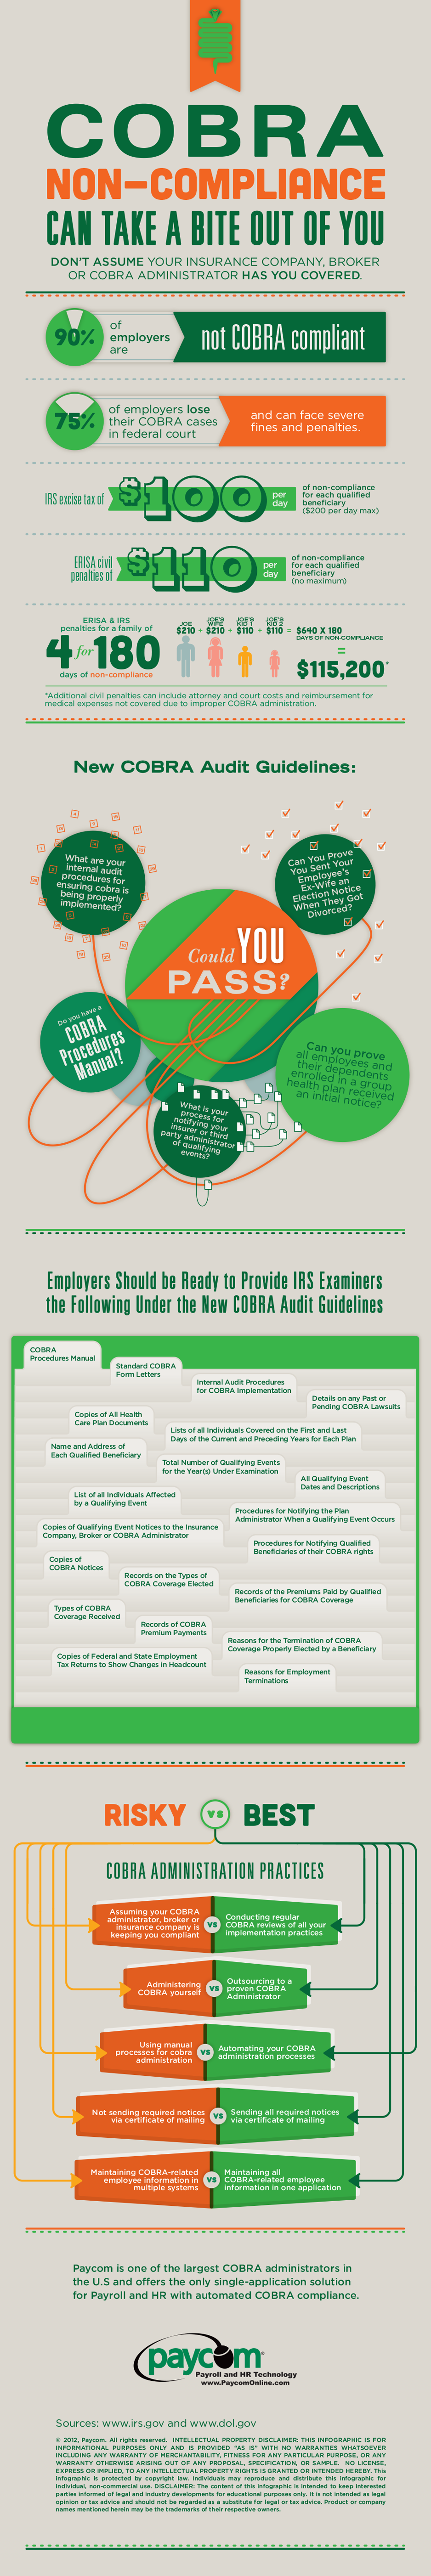 Paycom-Infographic-4.png